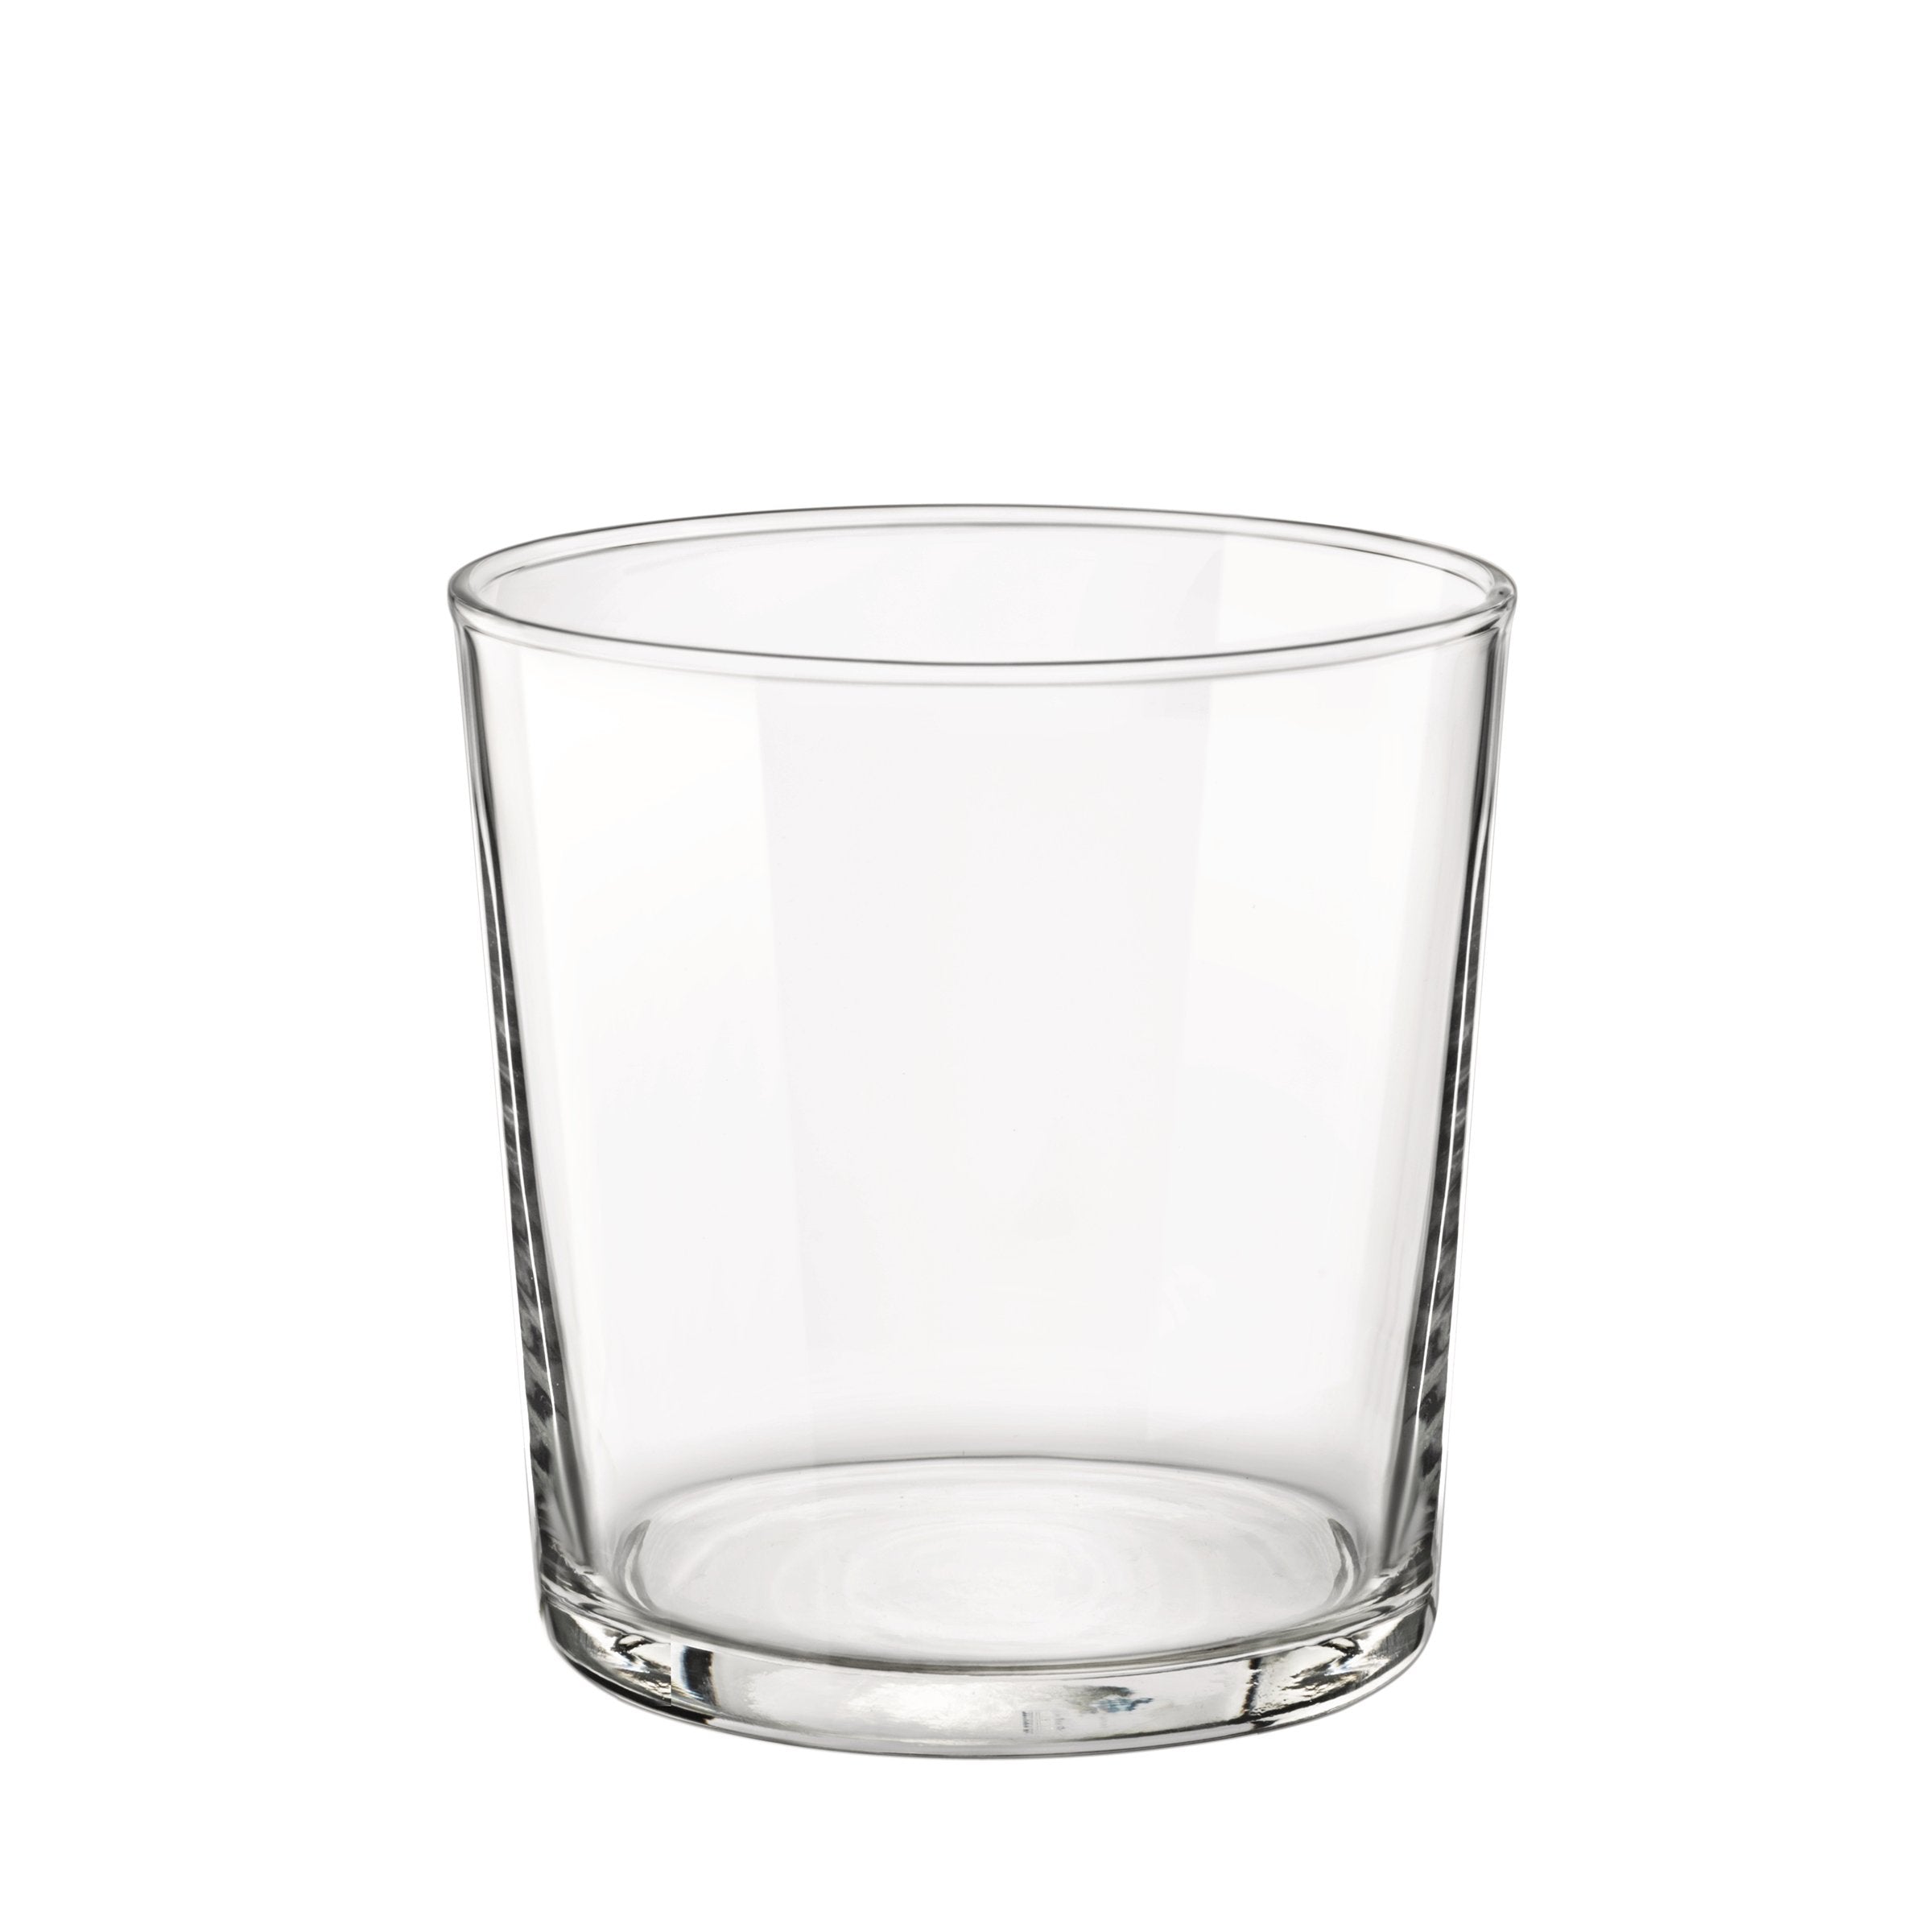 Bormioli Rocco Bodega Glassware, 12-Piece Medium 12 oz Drinking Glasses For  Water, Beverages & Cocktails, Tempered Glass Tumblers, Clear